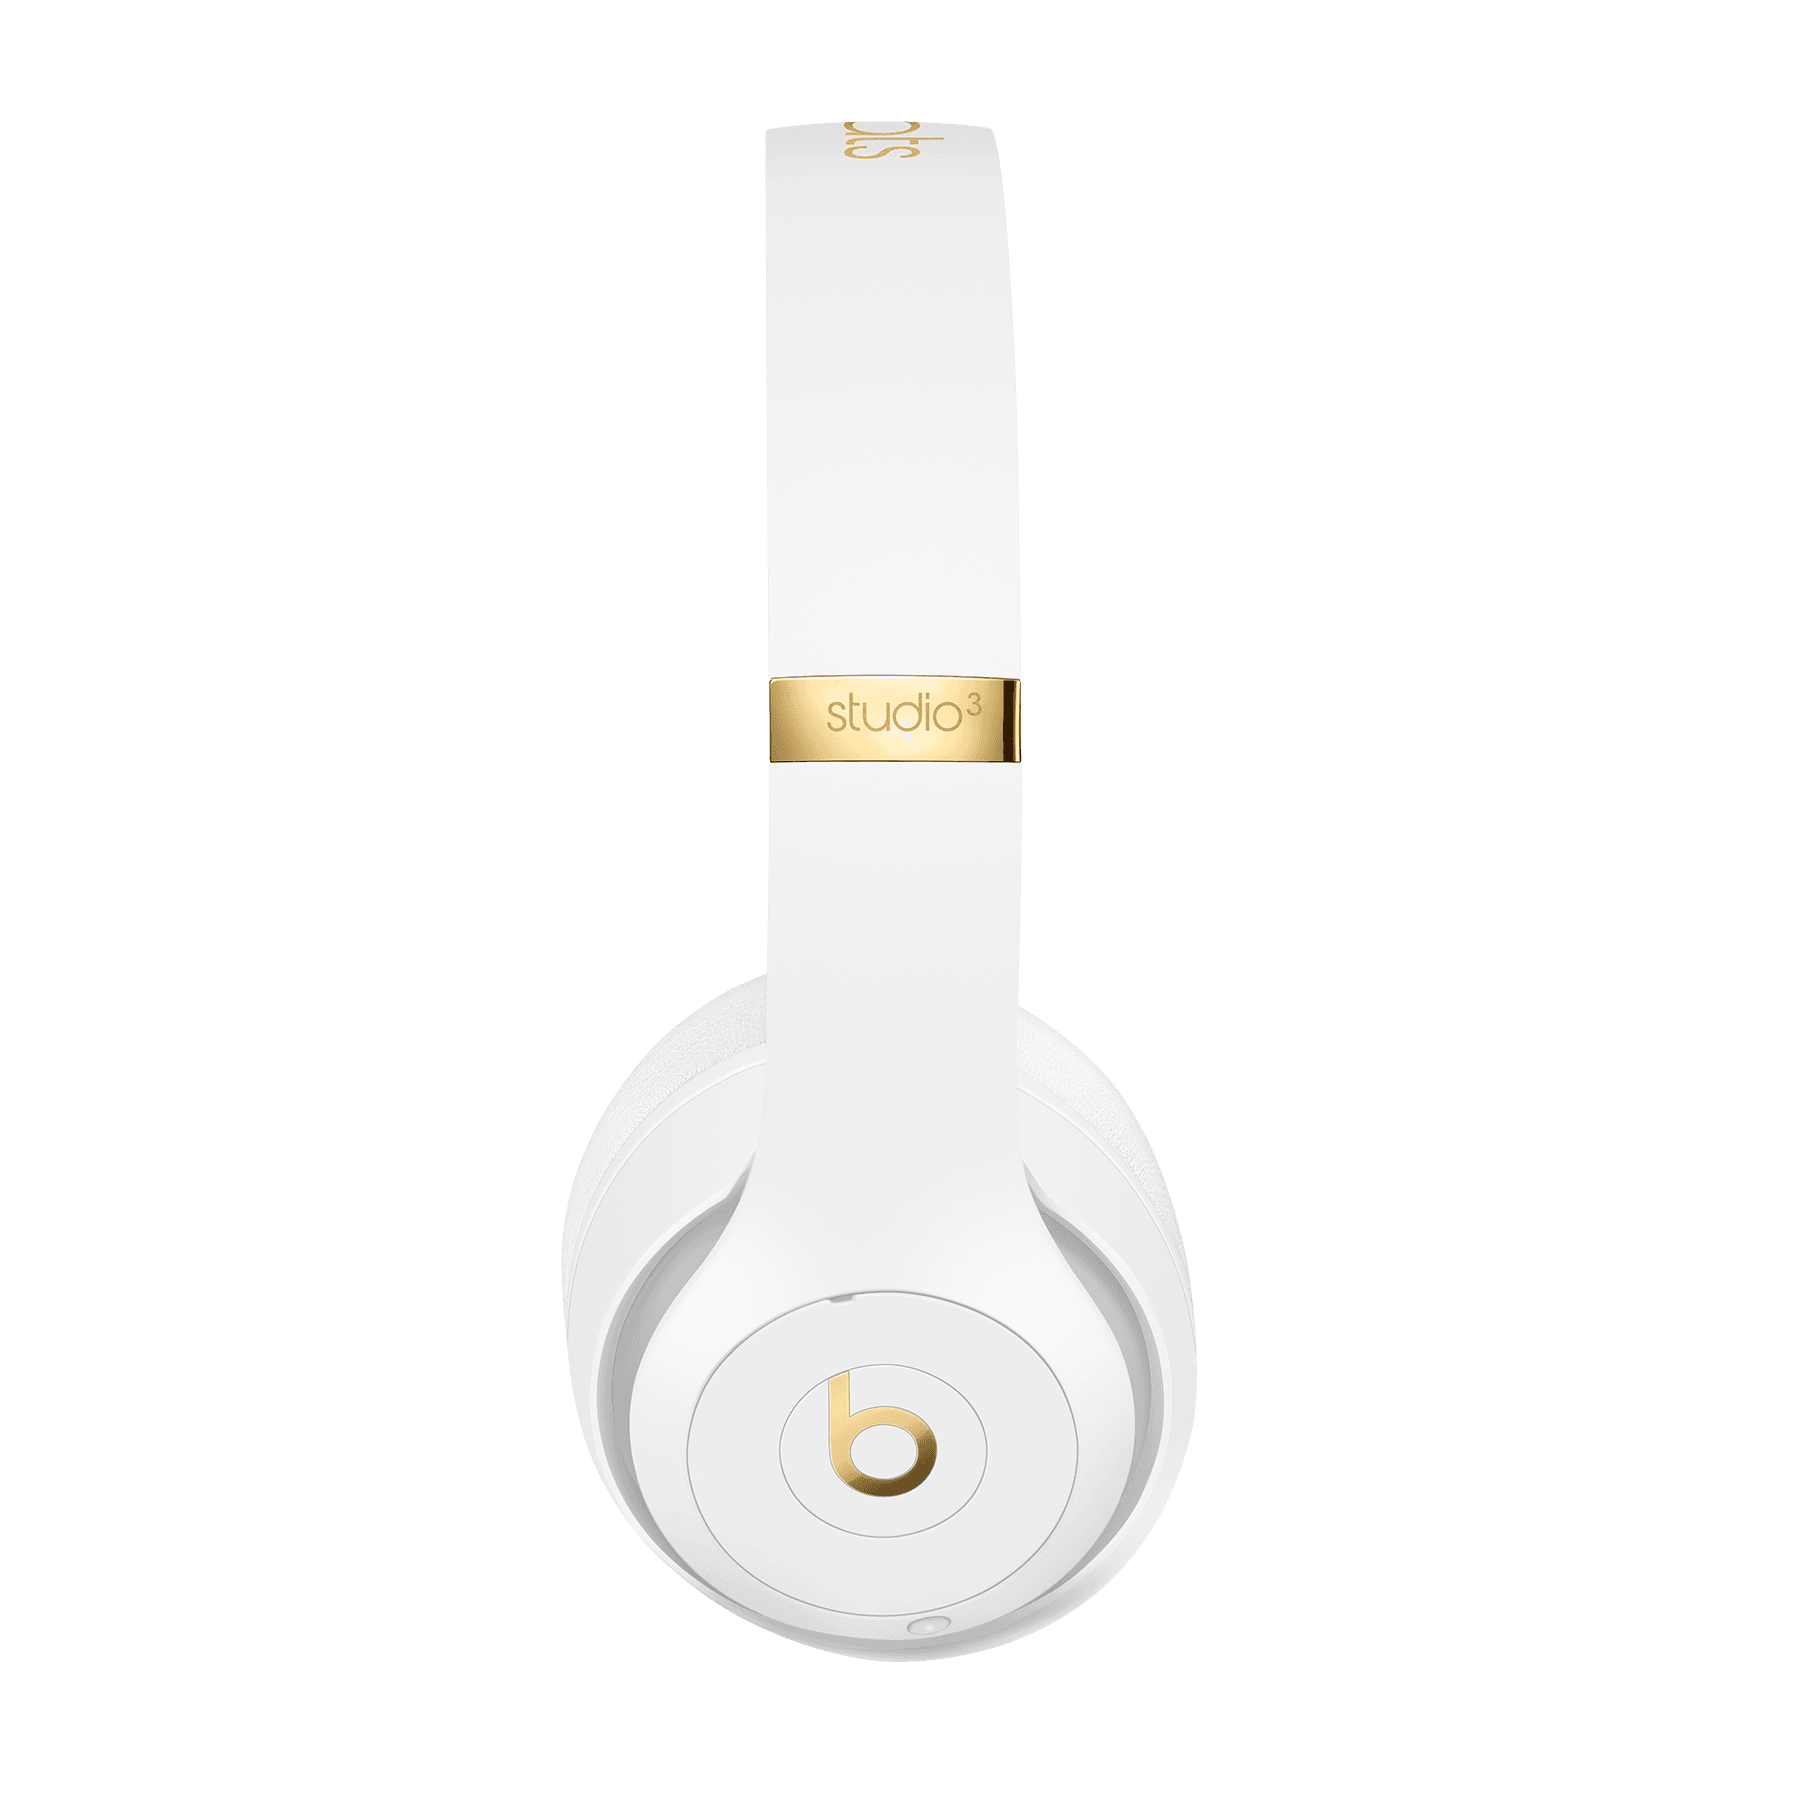 beats by dre white and gold